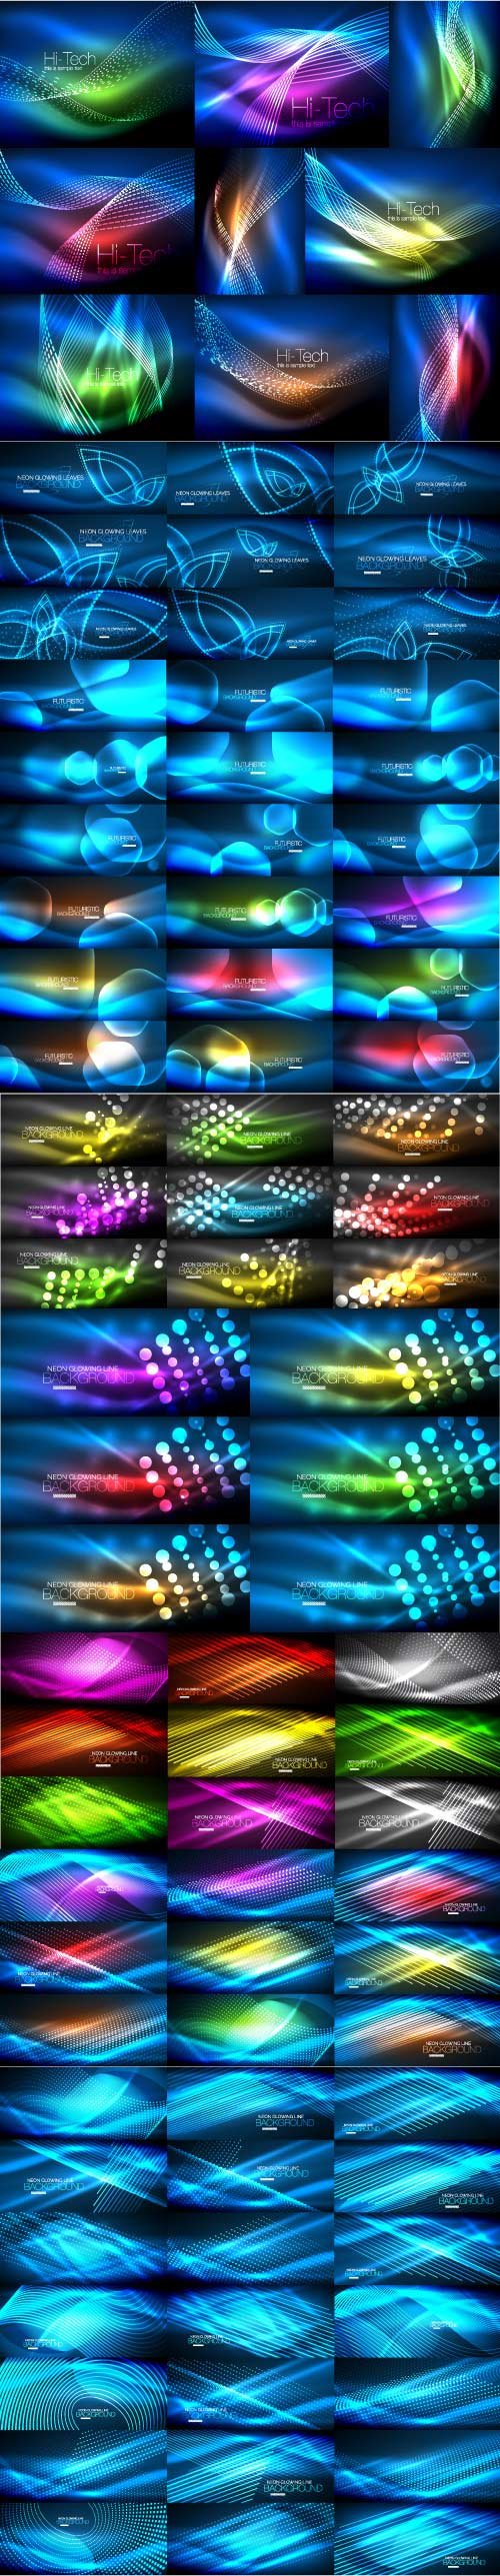 Mega collection of neon glowing waves # 4